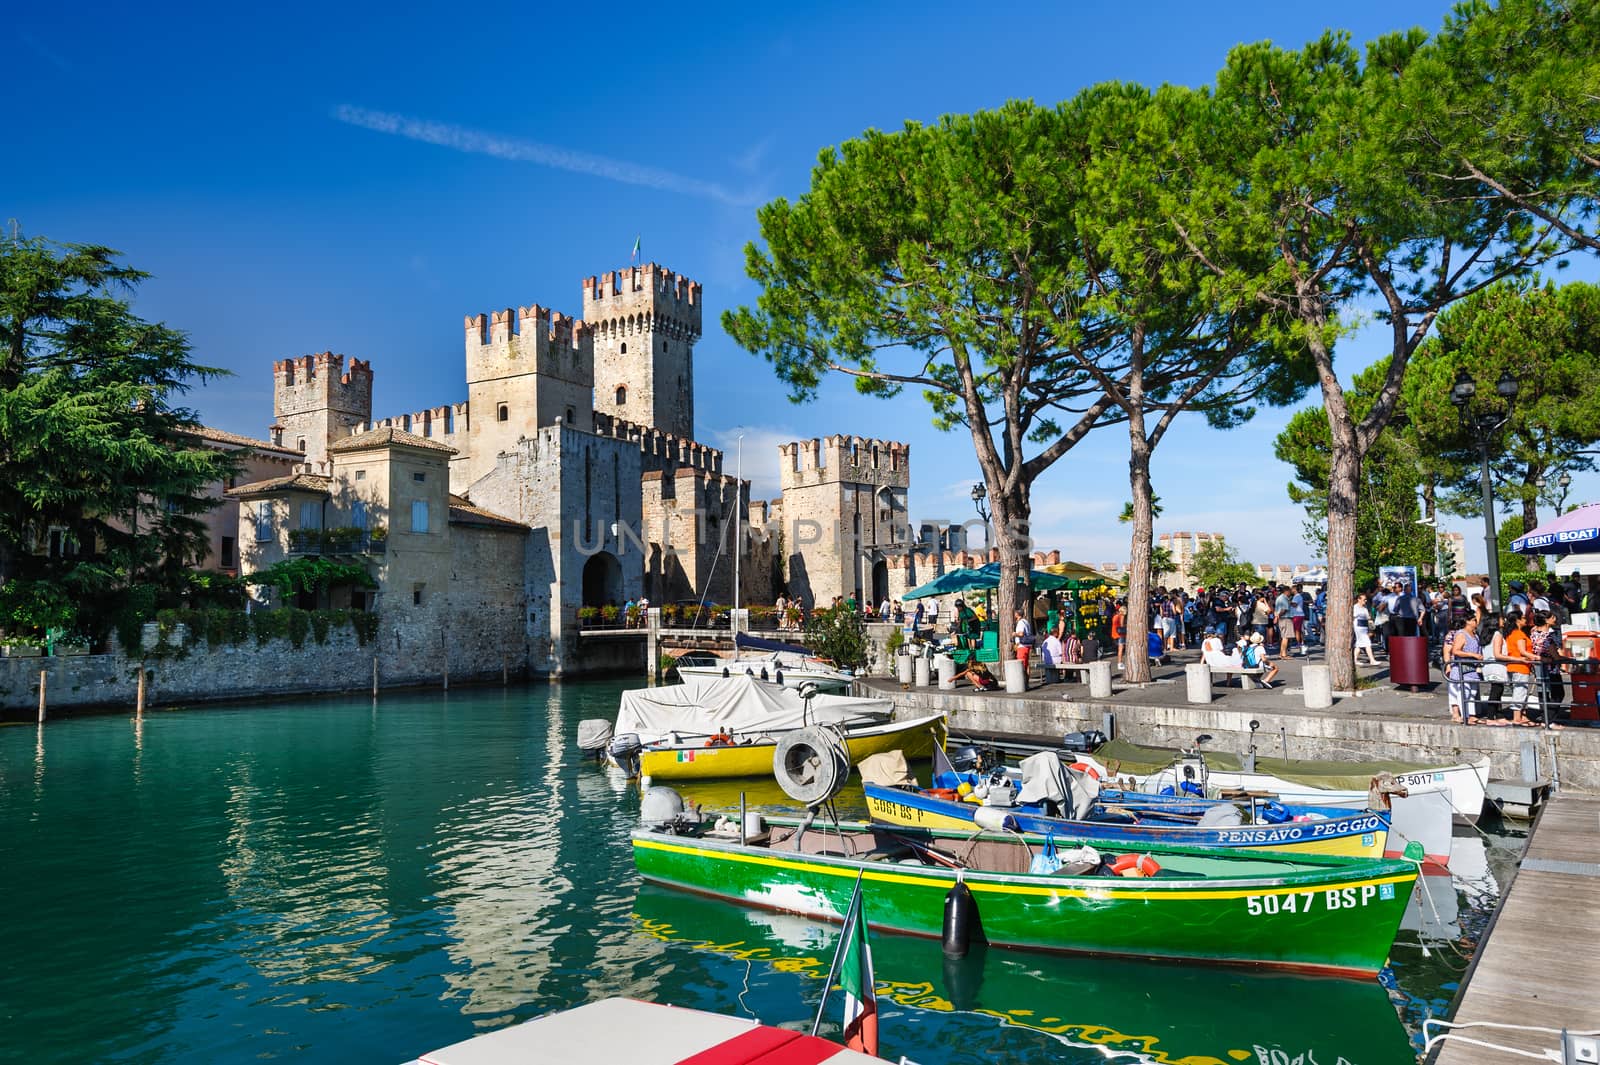 Medieval castle Scaliger in old town Sirmione on lake Lago di Garda, northern Italy by starush